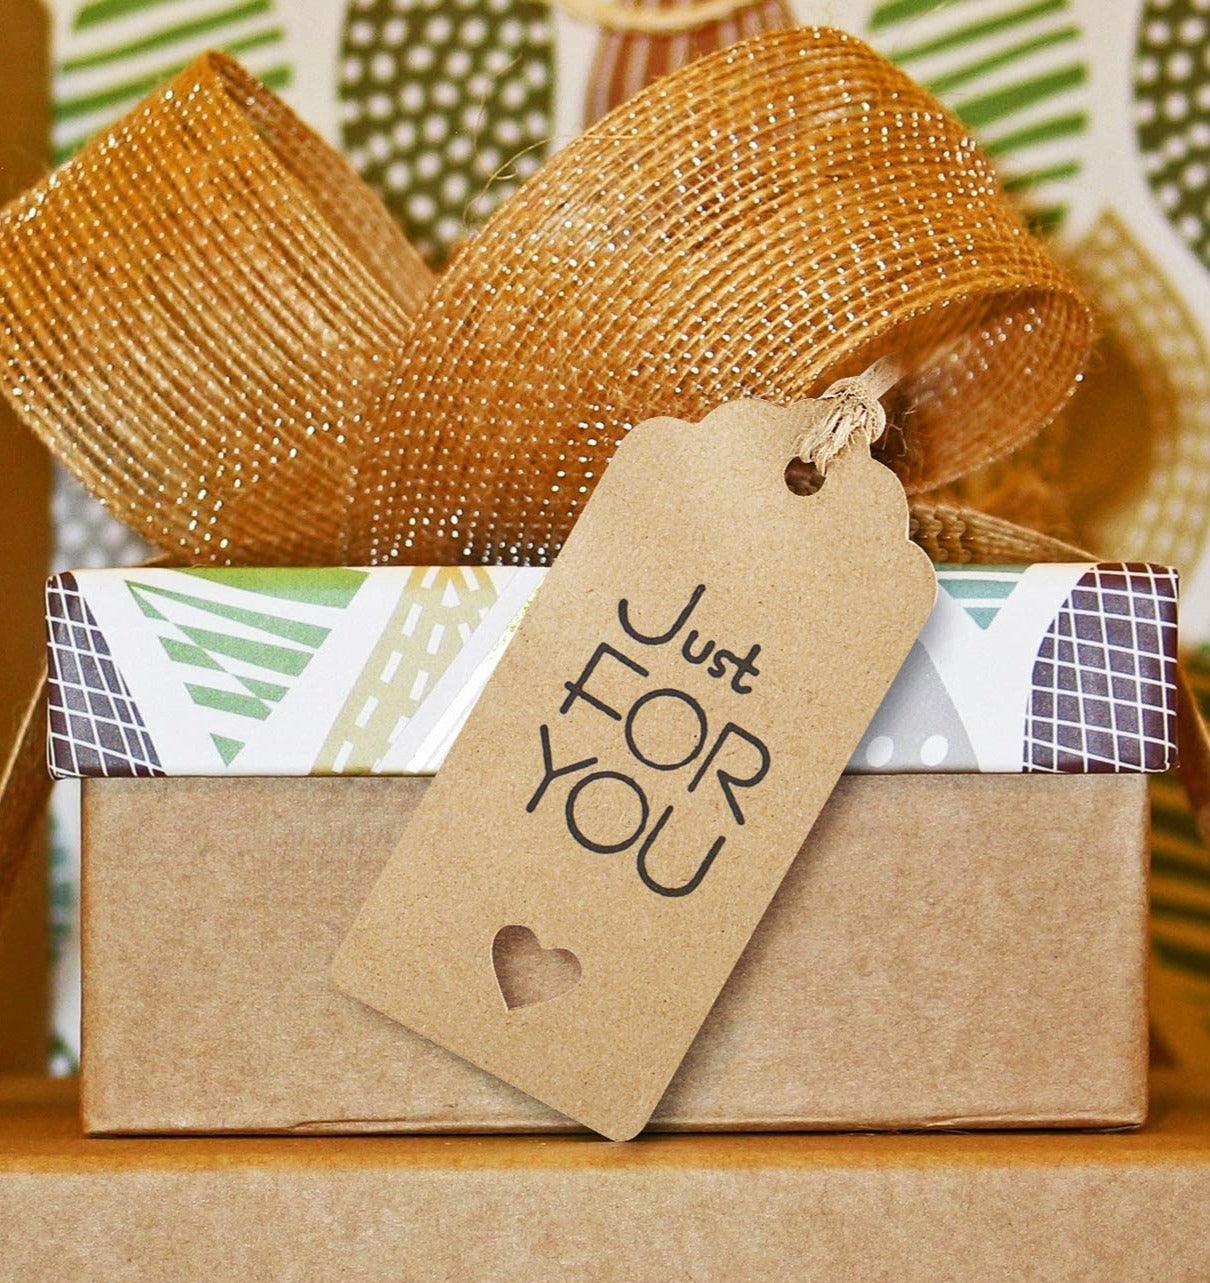 100 PCS Kraft Paper Gift Tags with String Blank Tags Vintage Wedding Favor  Hang Tags with 66 Feet Natural Jute Twine Retangle Tags for Crafts